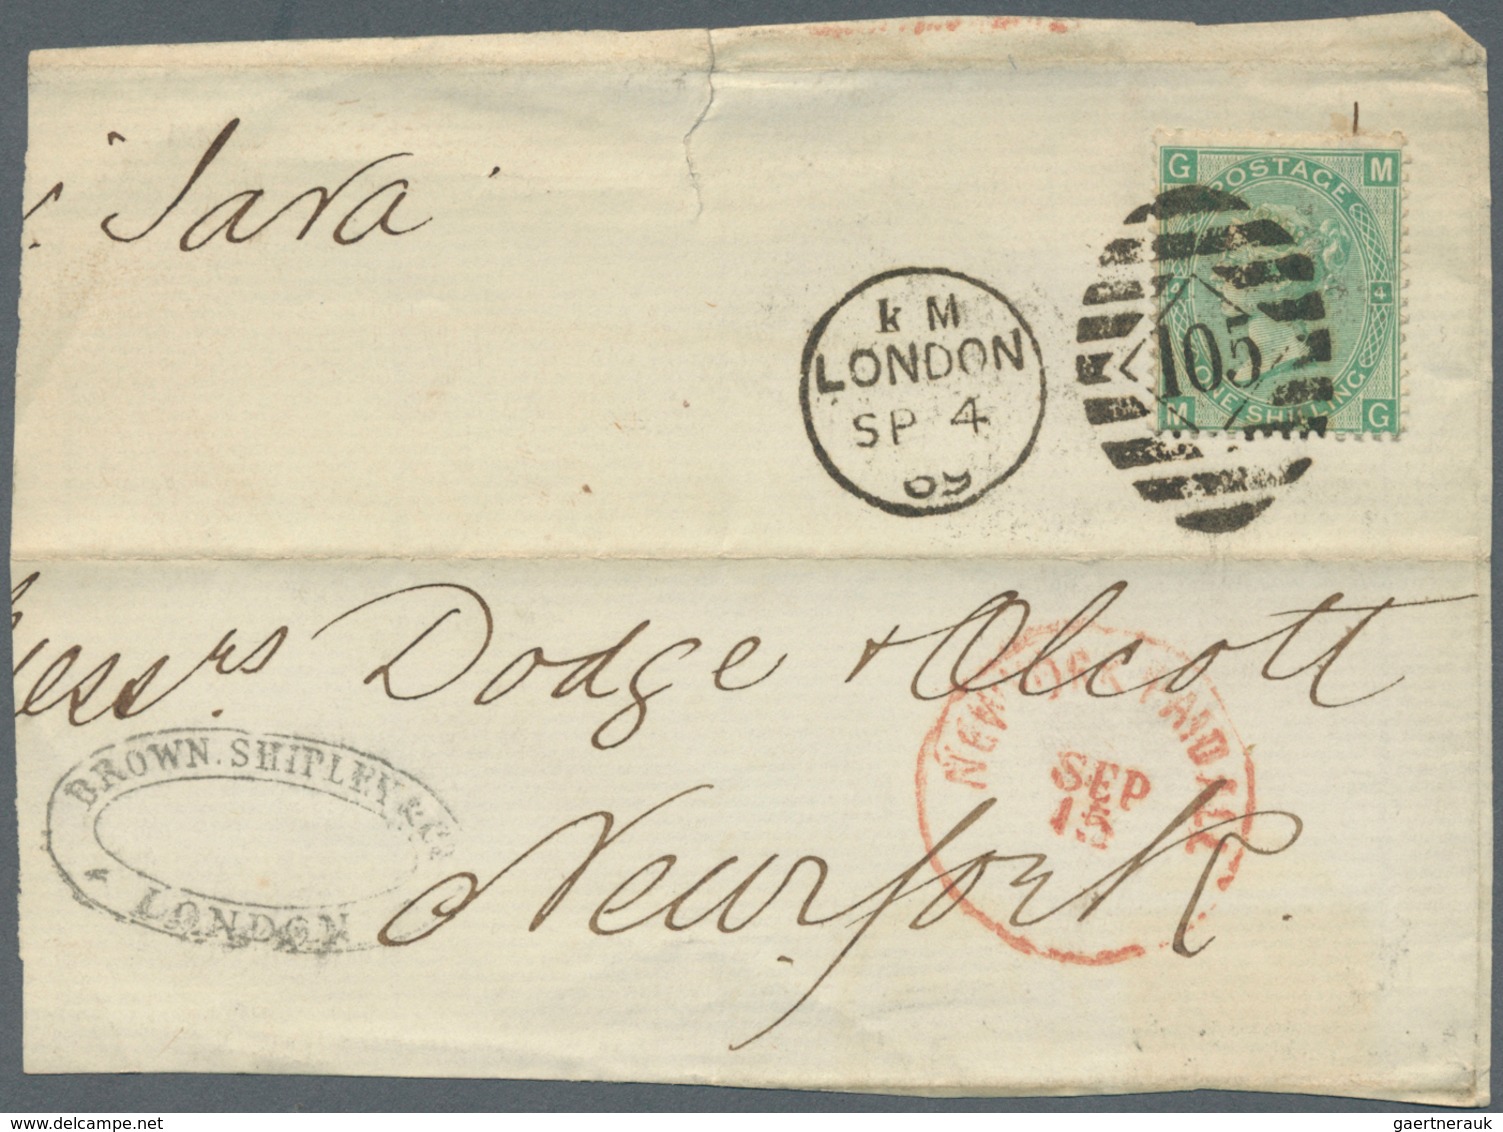 26694 Großbritannien: 1865/1869, assortment of 74 fronts/large fragments each franked with 84 copies 1s. g